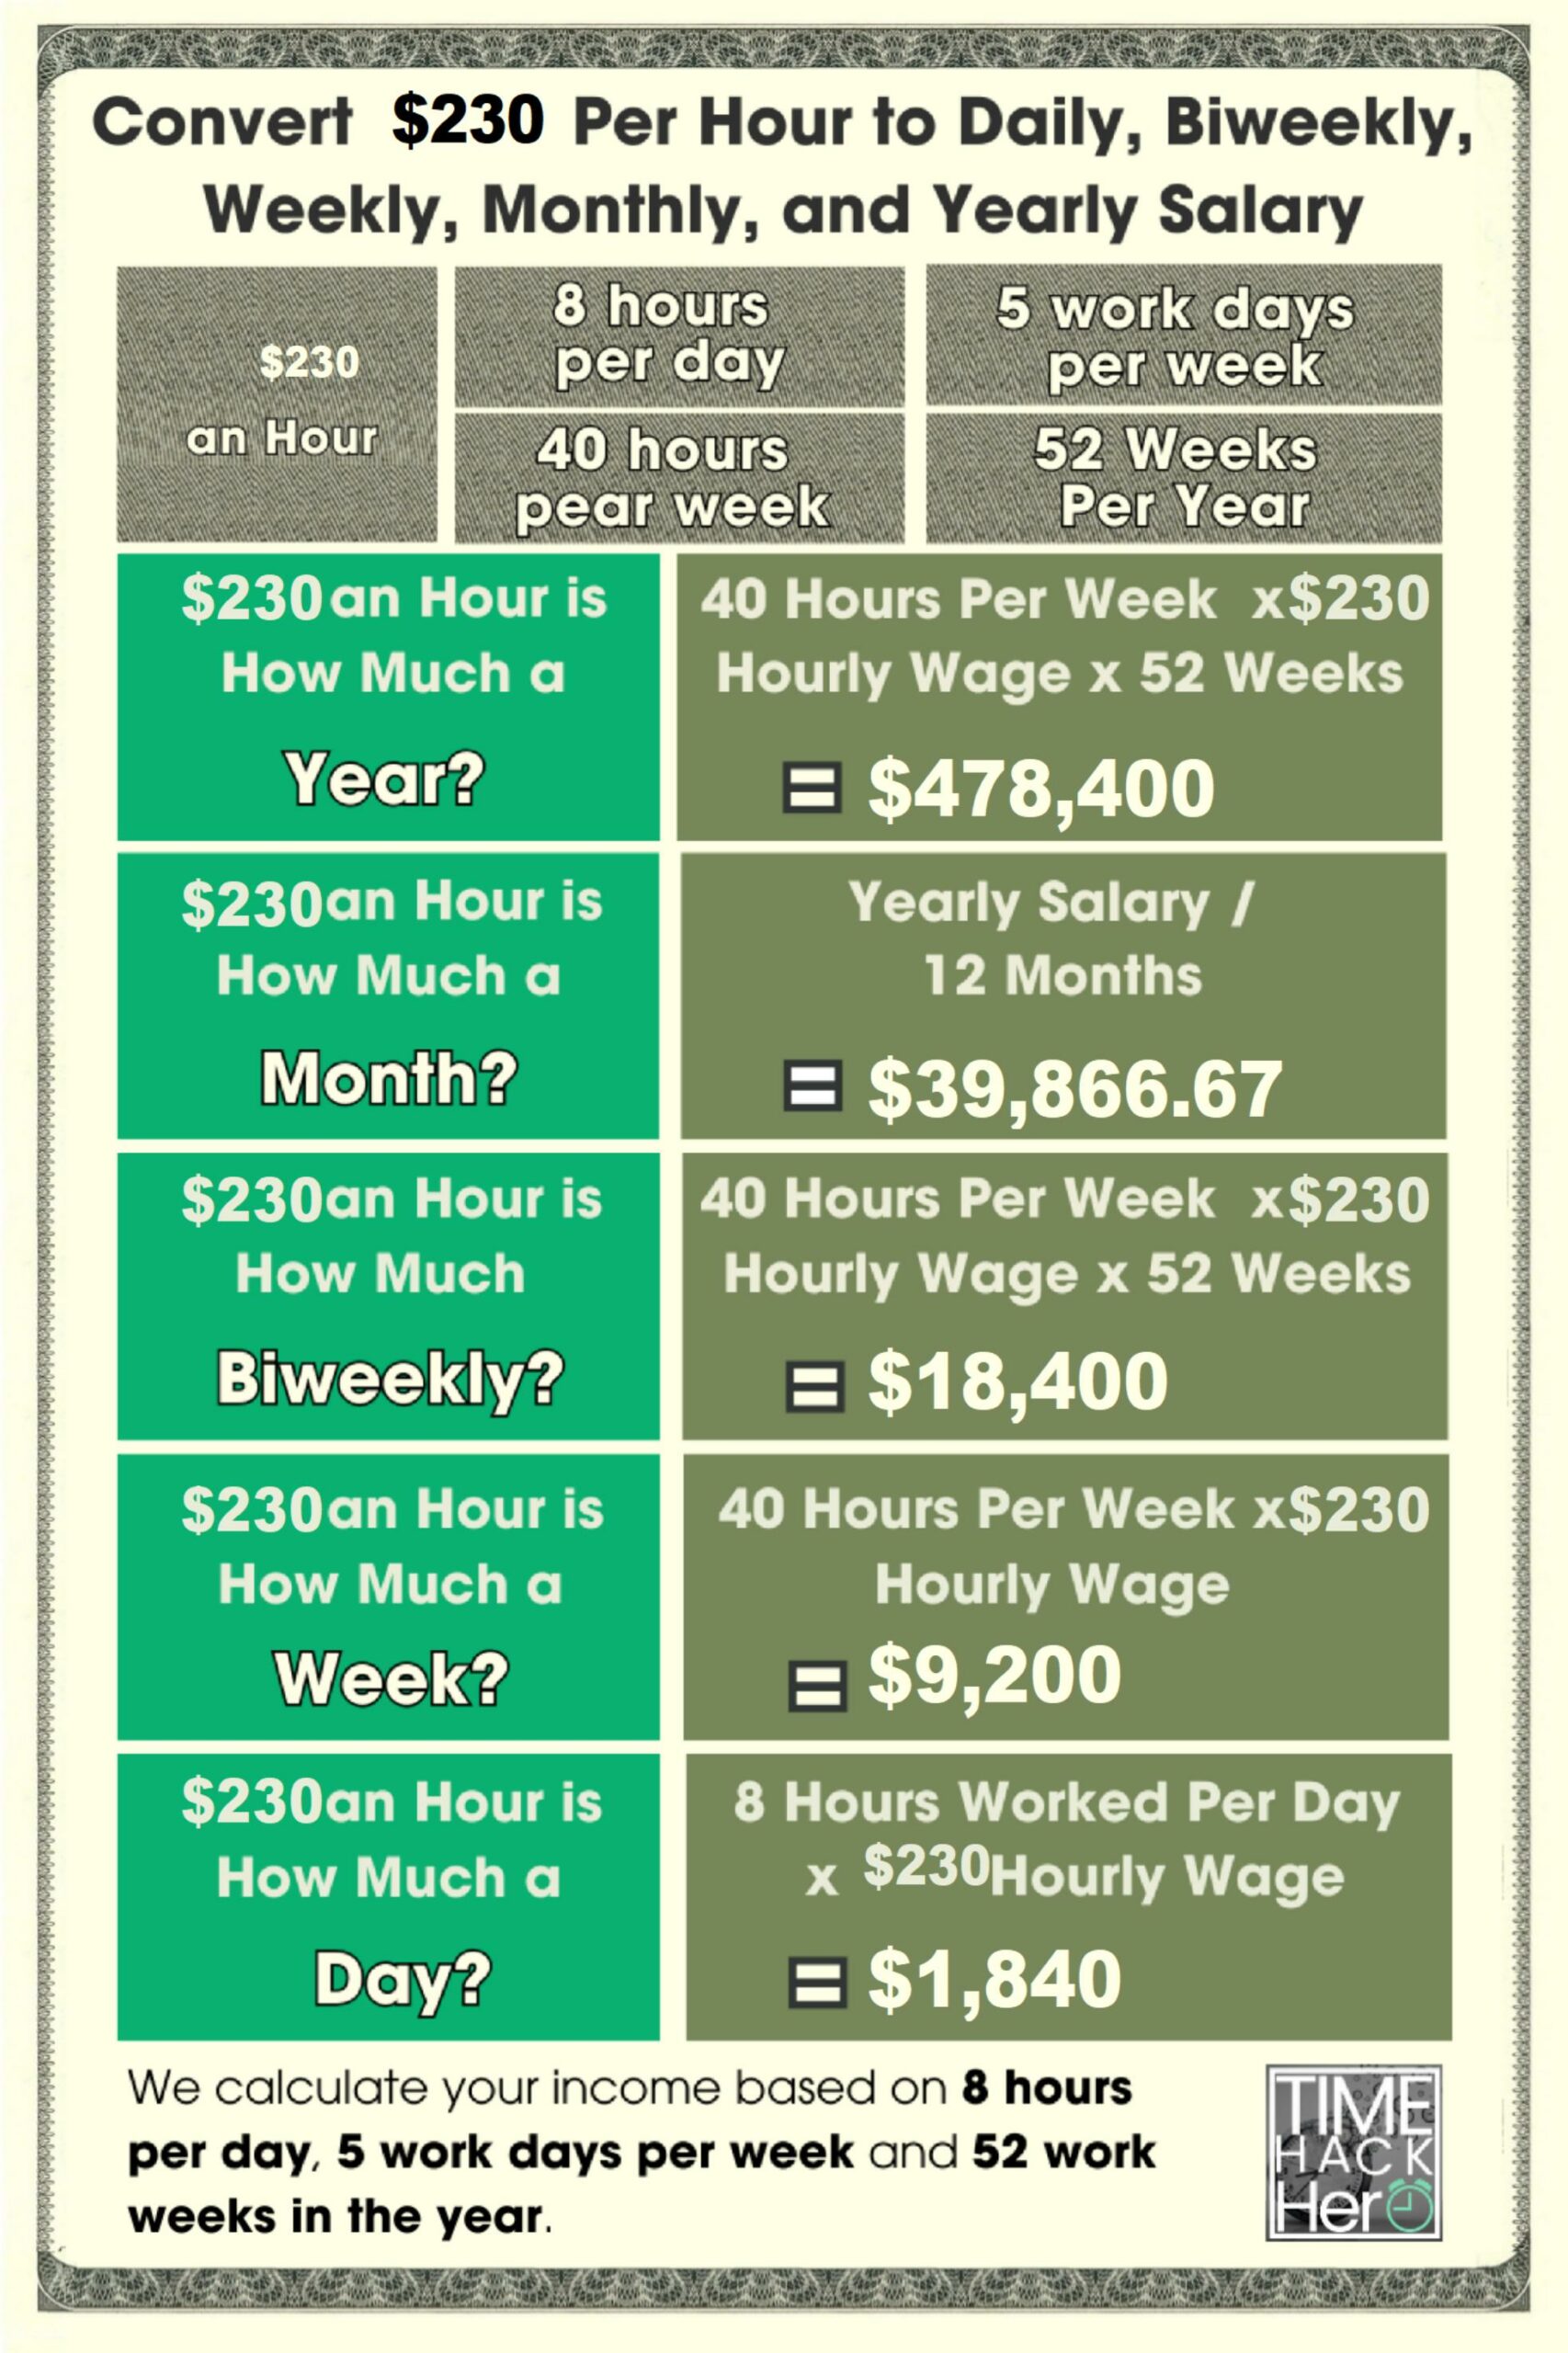 Convert $230 Per Hour to Weekly, Monthly, and Yearly Salary